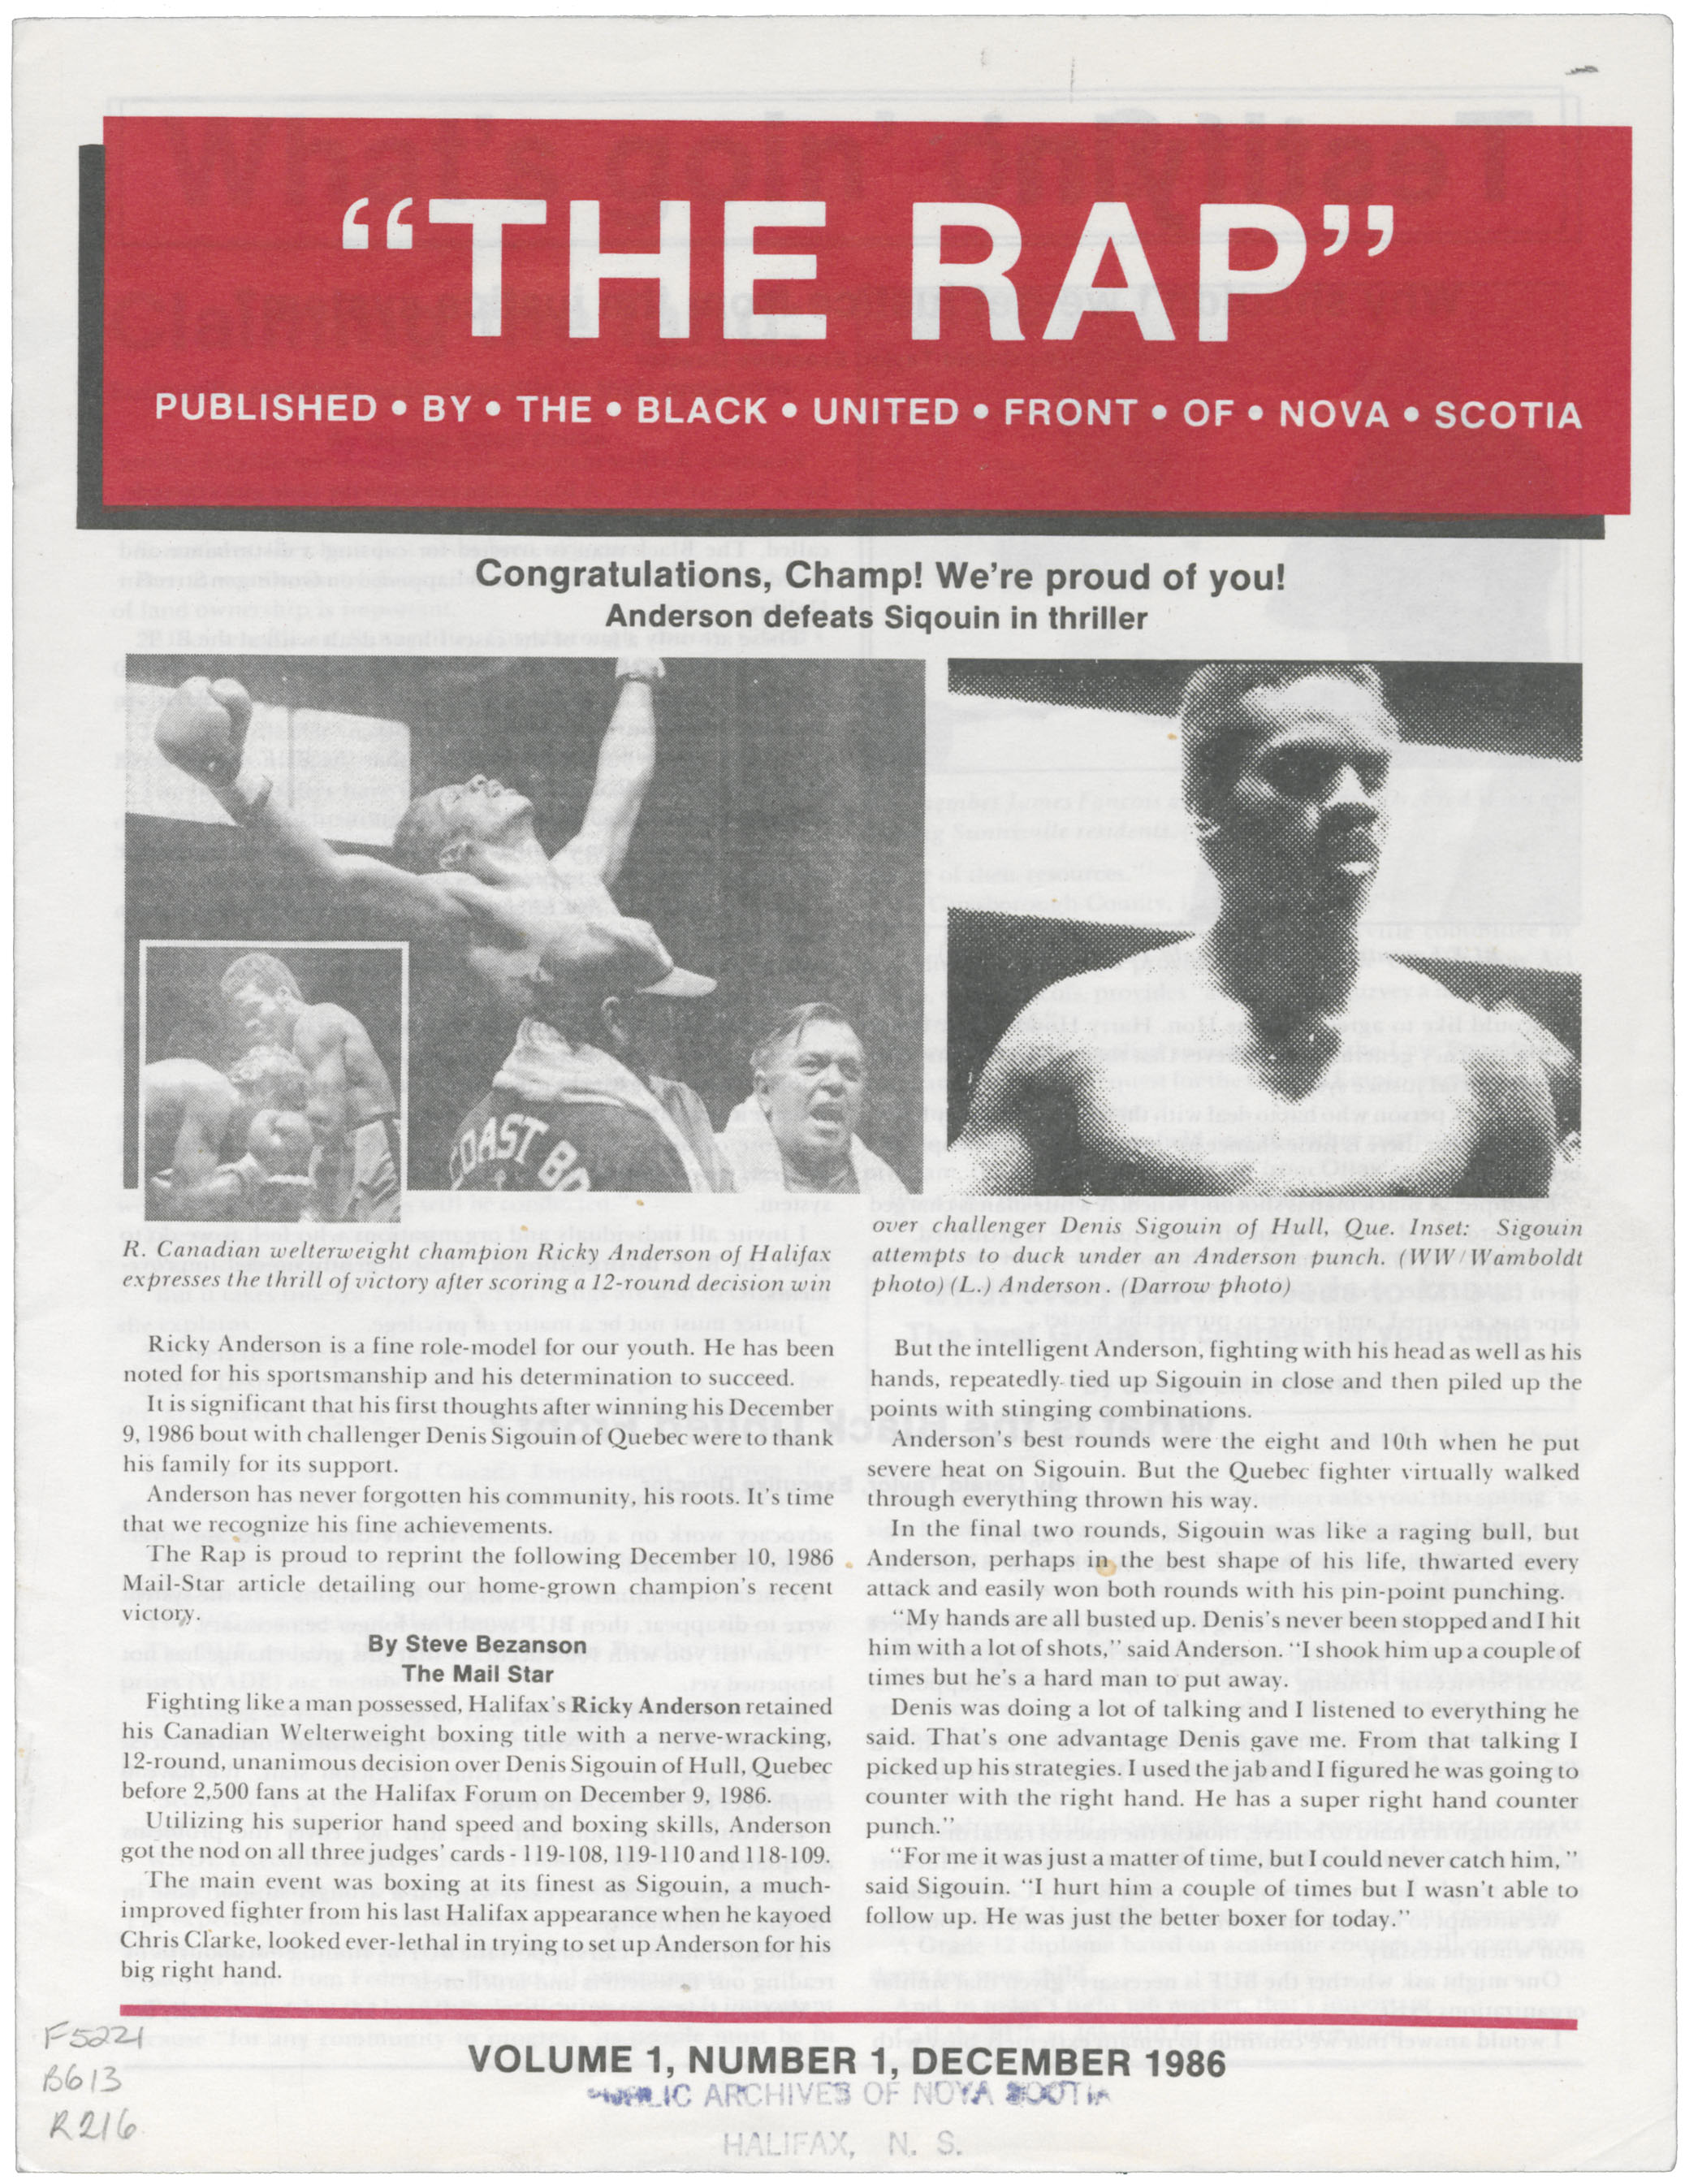 /newspapers/results/?nTitle=THE+RAP - 202005352